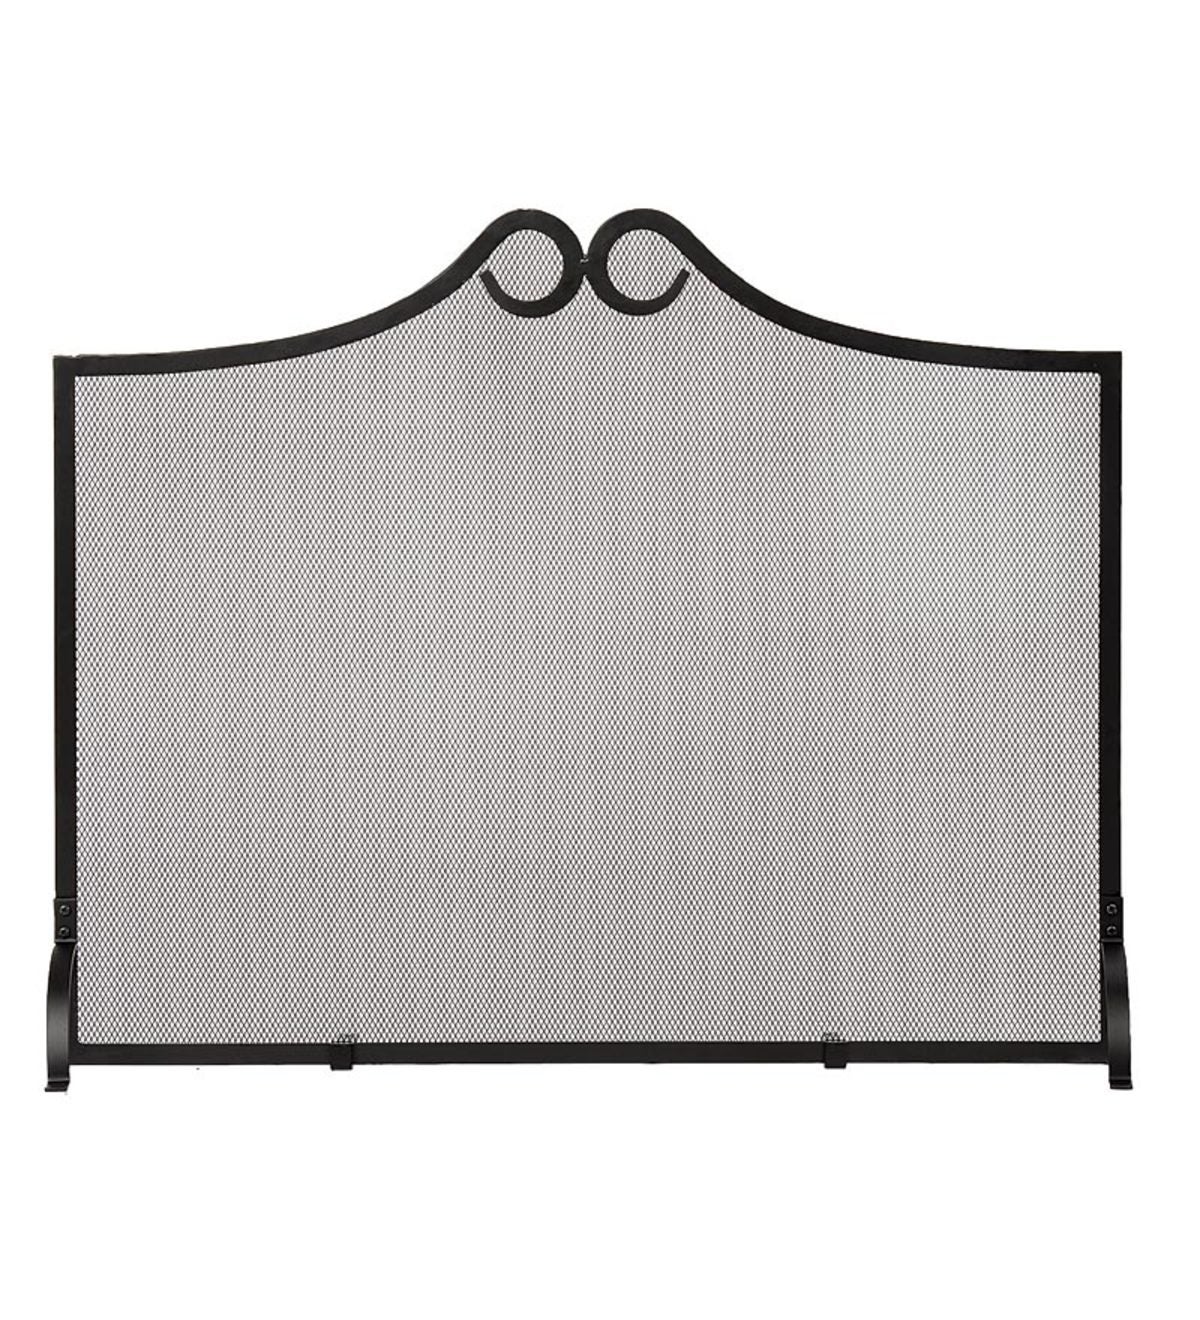 Wrought Iron Scrolled Arch Single Panel Fireplace Screen